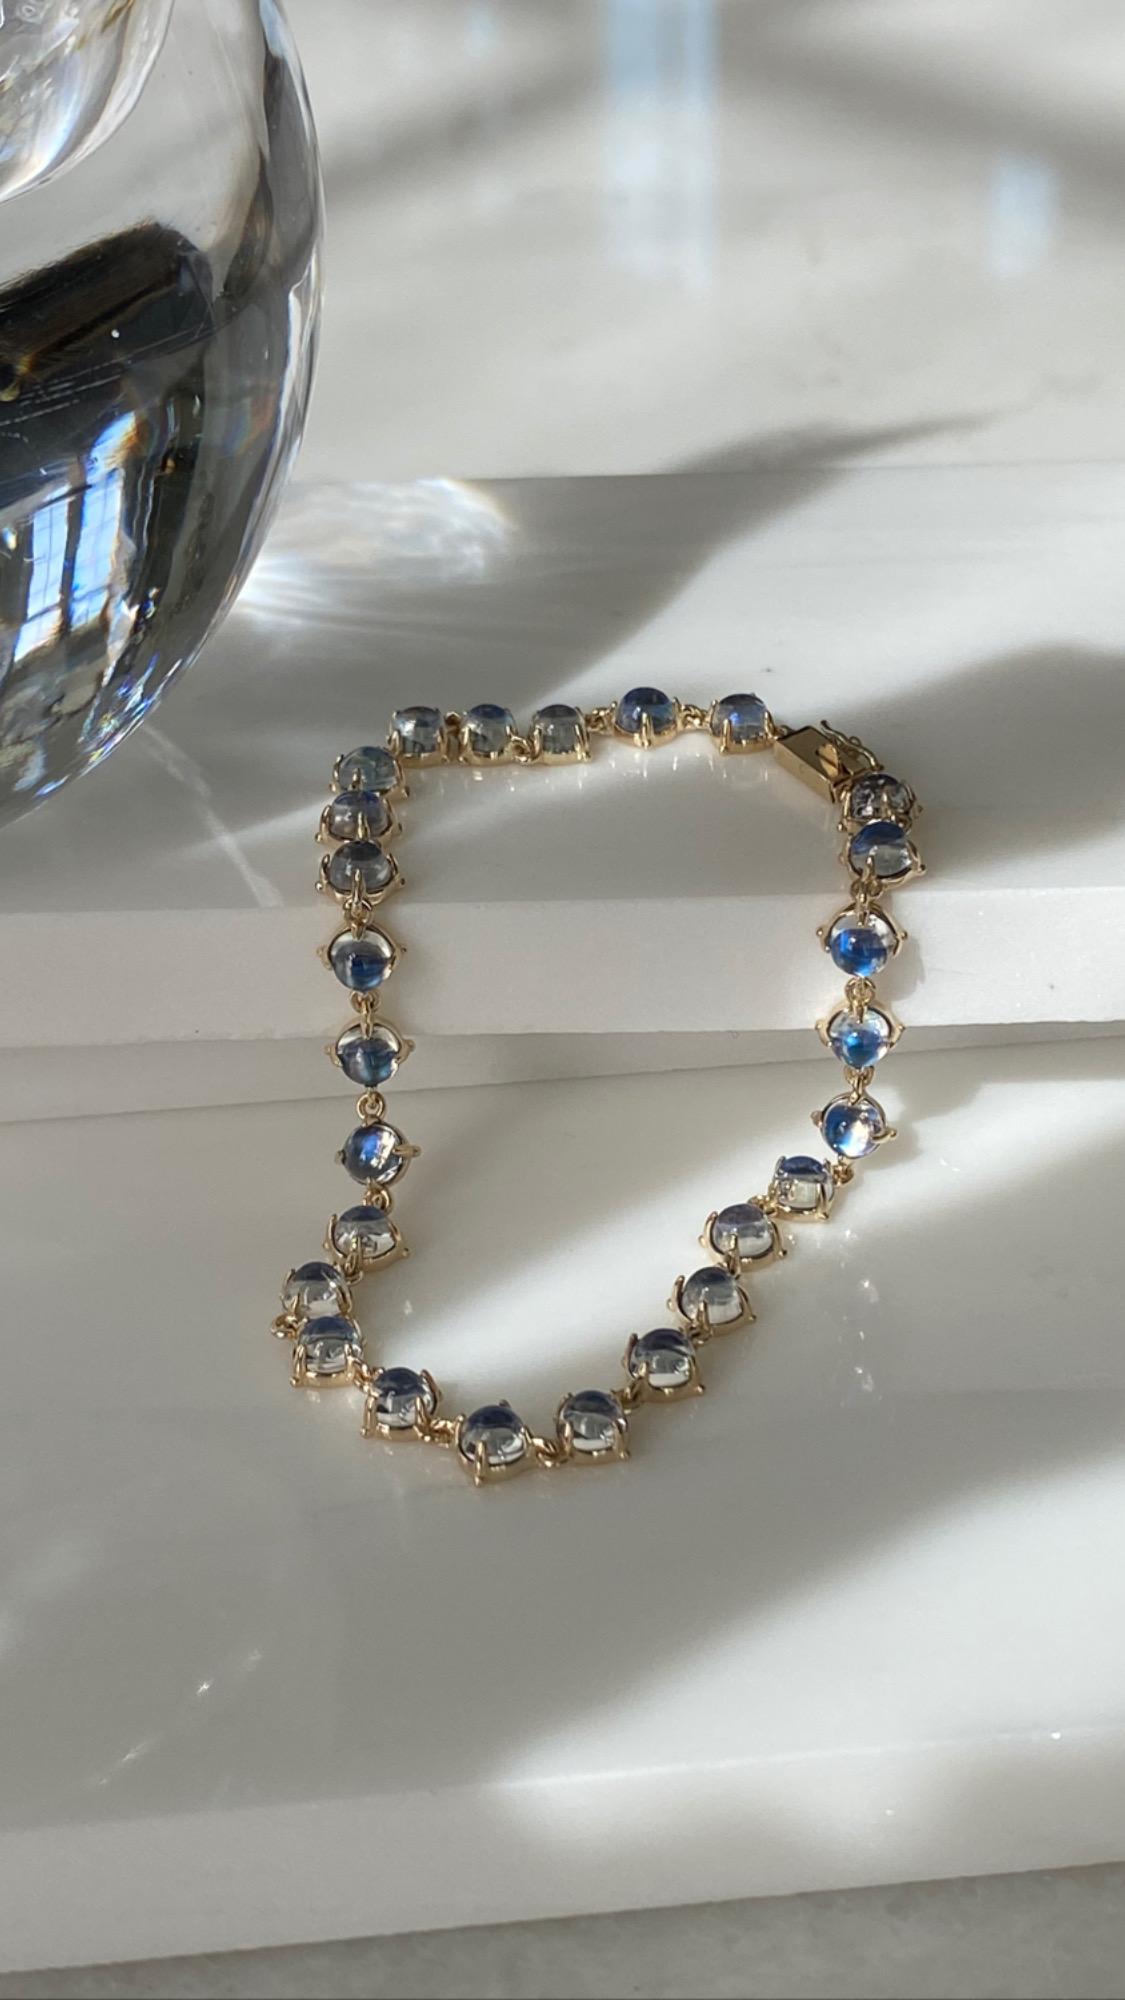 Jean Basse Royal Blue Cabochon Moonstone Tennis Bracelet. The bracelet houses 26 4mm moonstones nestled in a 14K polish gold setting and push clasp with a safety closure. The length is 6.75 inches. The stones were hand picked for their quality. 


